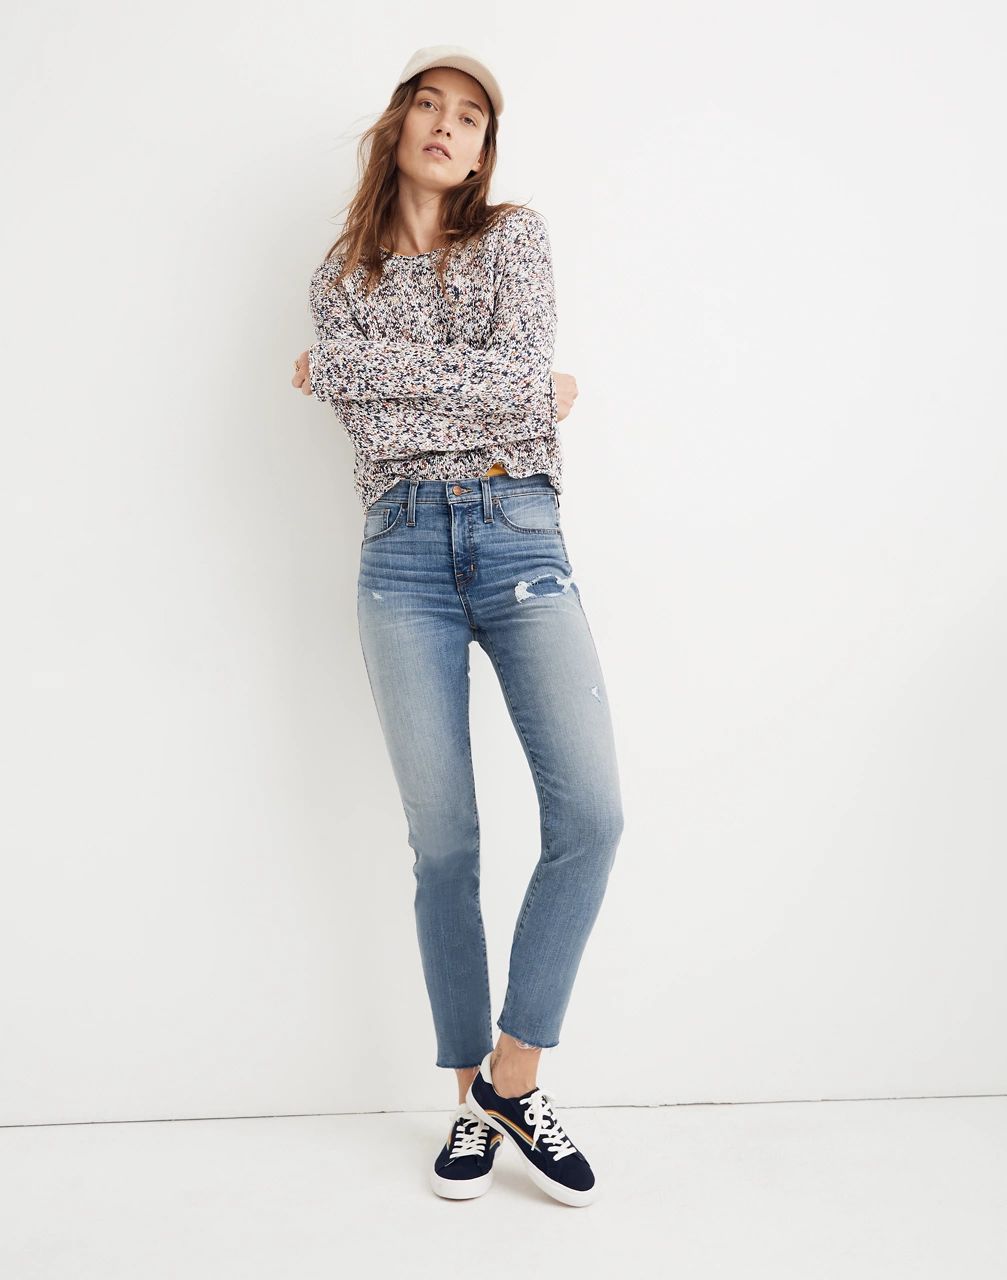 Petite Stovepipe Jeans in Holburn Wash | Madewell